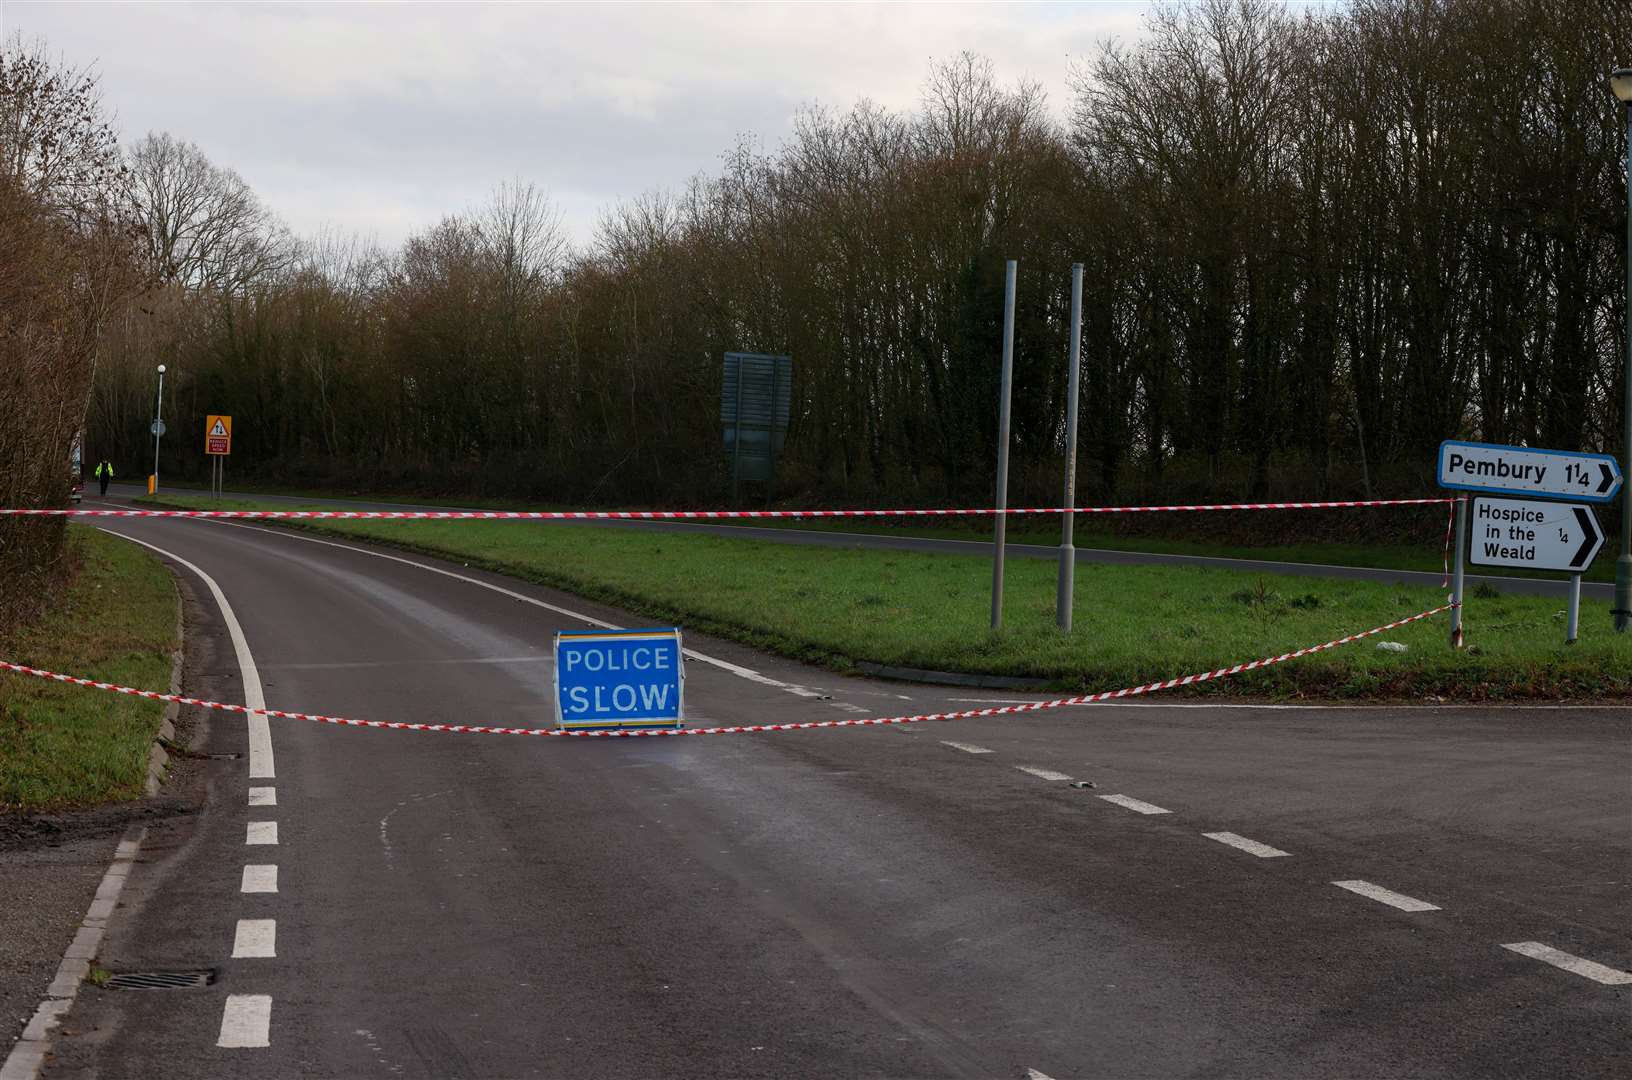 Police closed the road./ppPicture: UKNIP